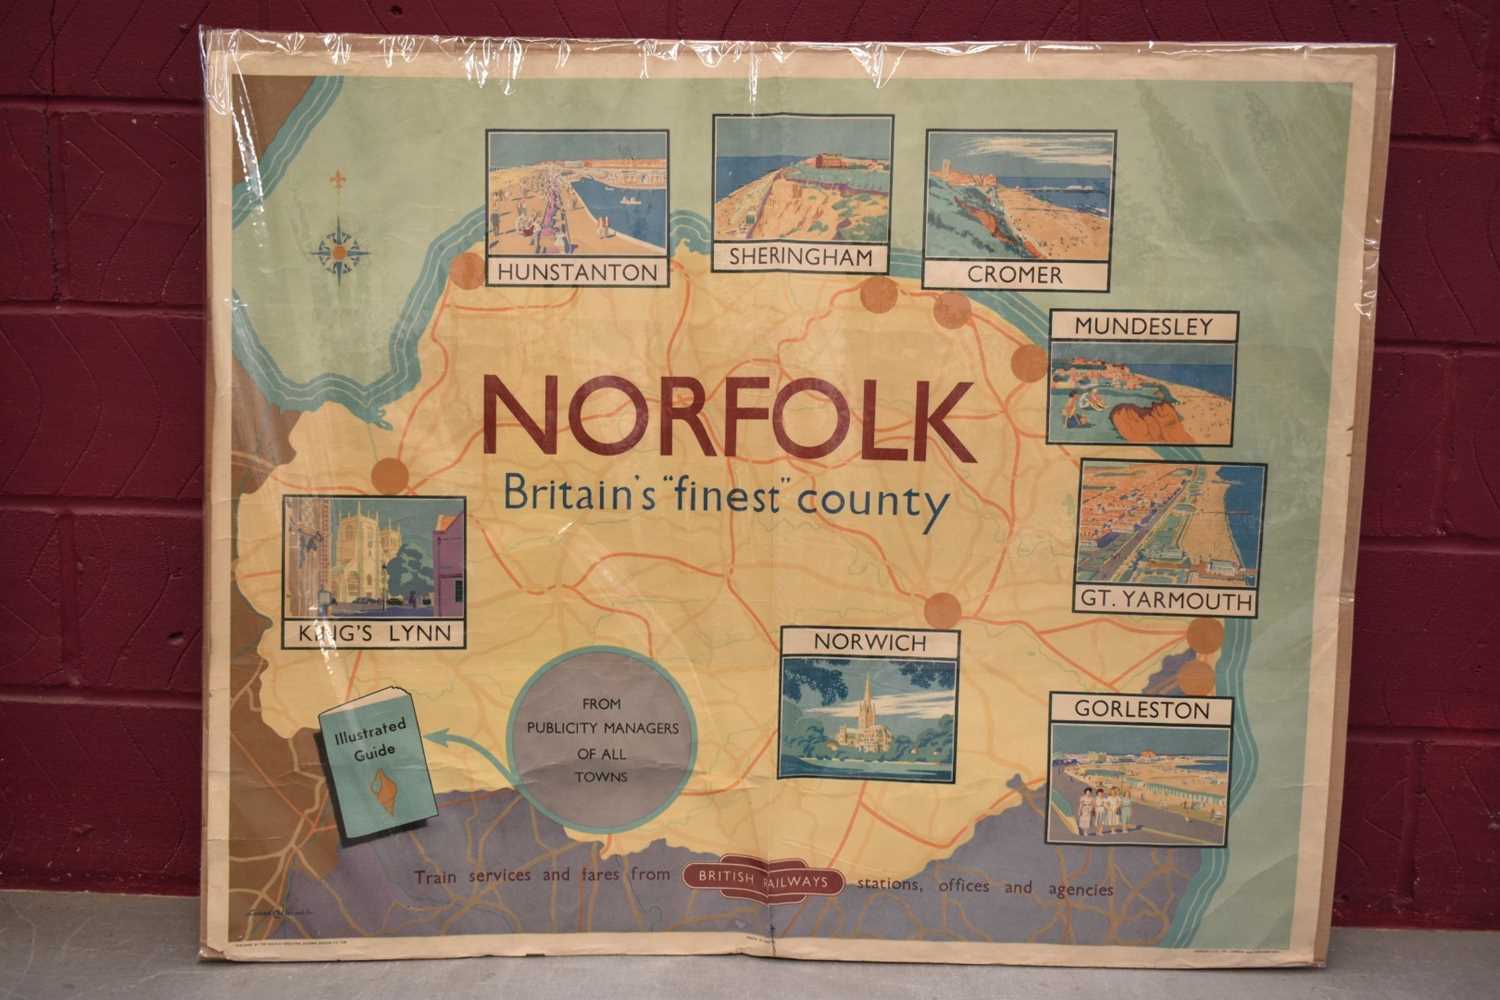 Lance Cattermole (1898-1992) vintage travel poster for Norfolk "Britains Finest County", published b - Image 2 of 19